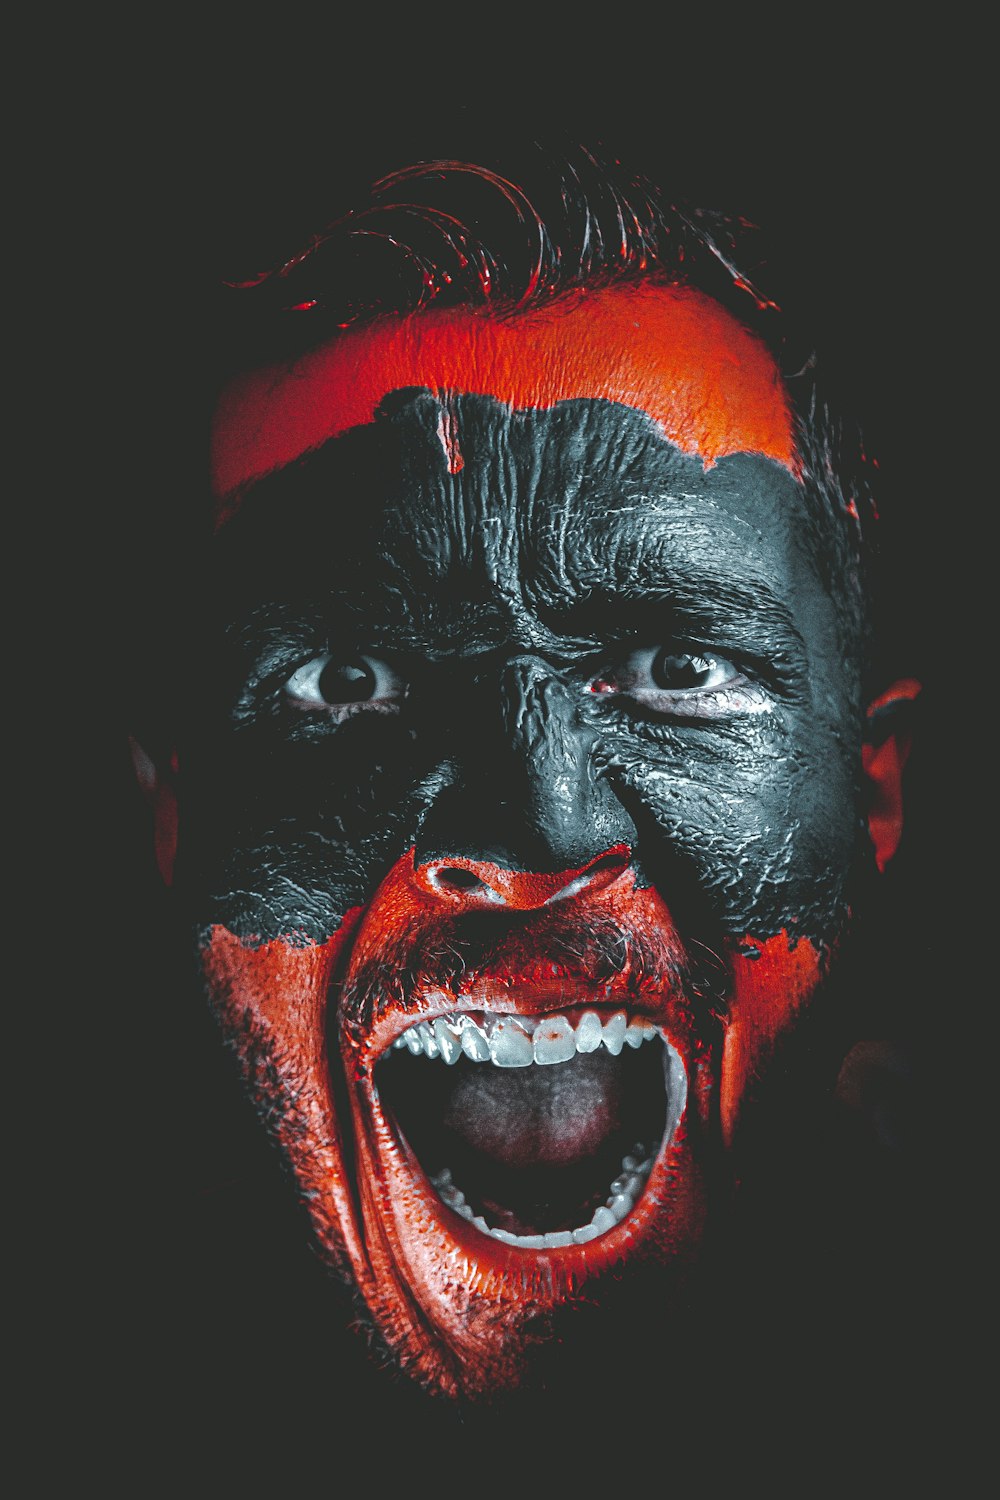 Person with red and black face paint photo – Free Tehran Image on Unsplash